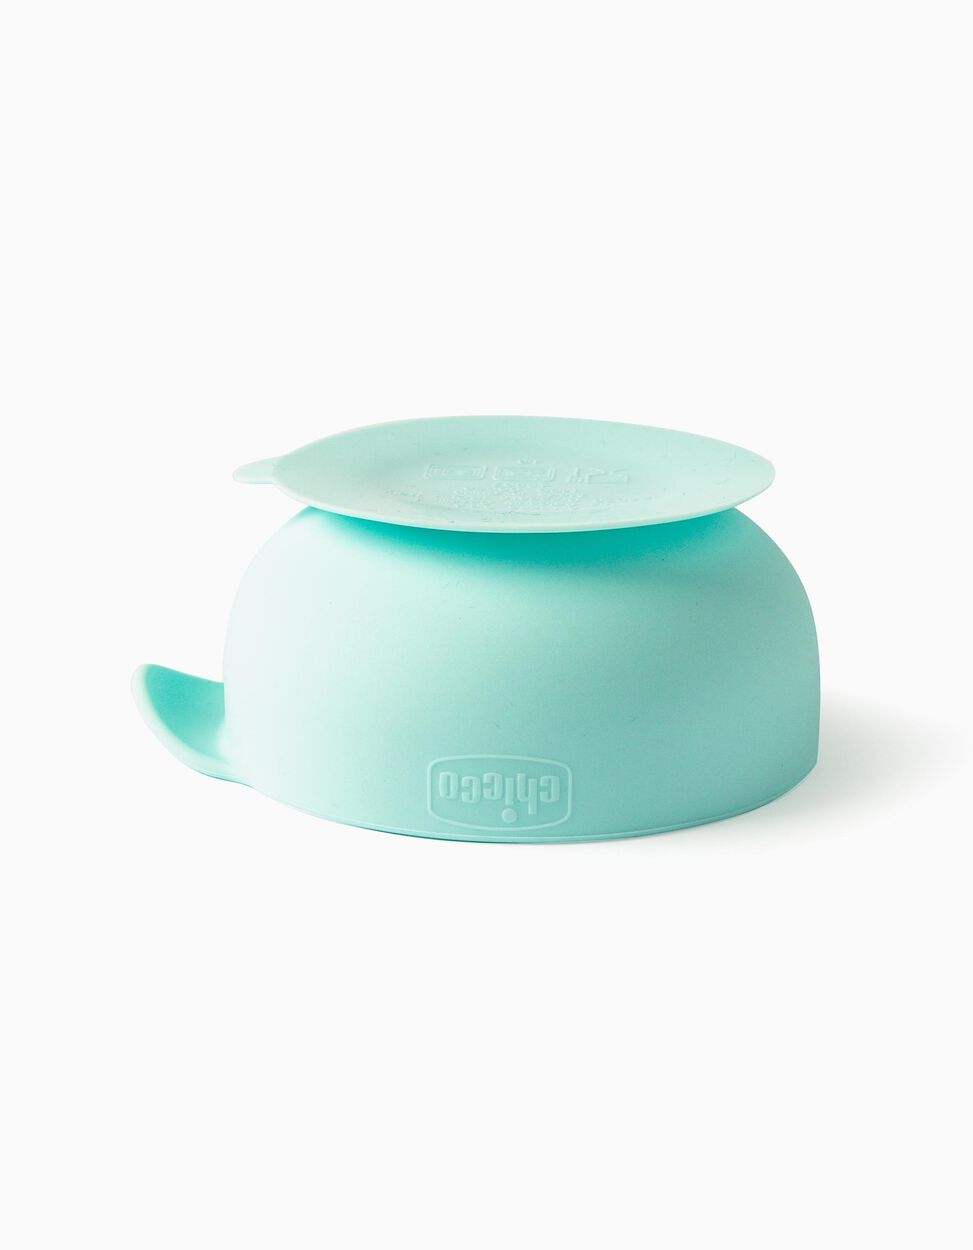 Eat Easy Silicone Bowl by Chicco